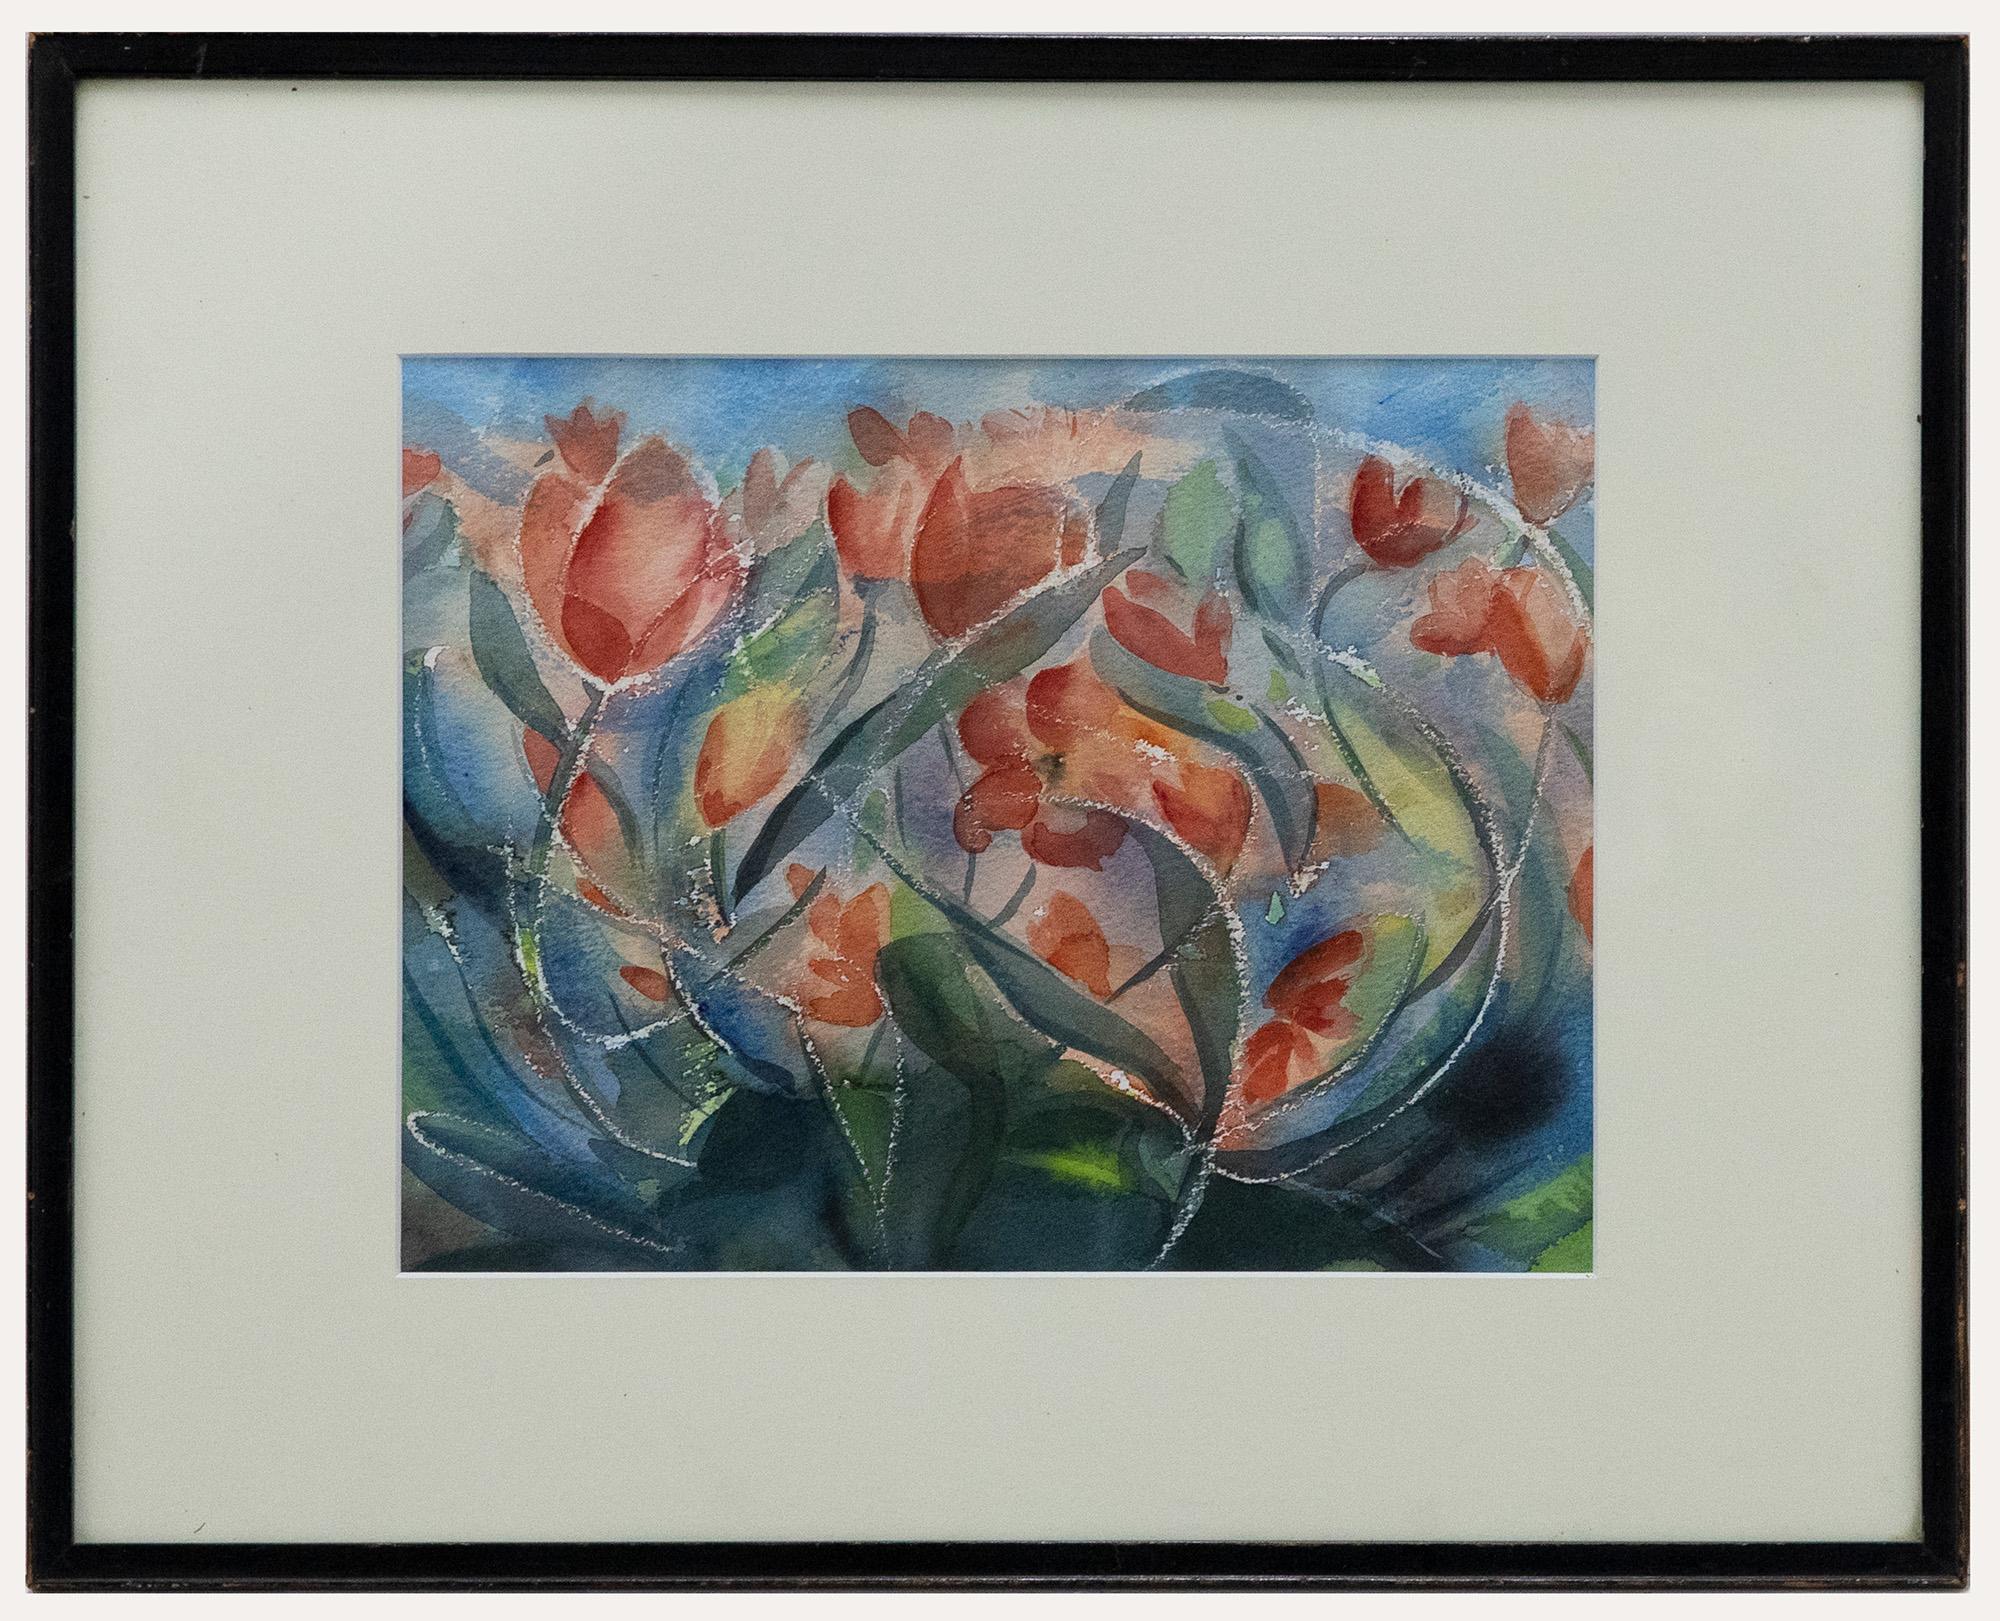 Unknown Still-Life - Framed Contemporary Watercolour - Wind Tossed Tulips